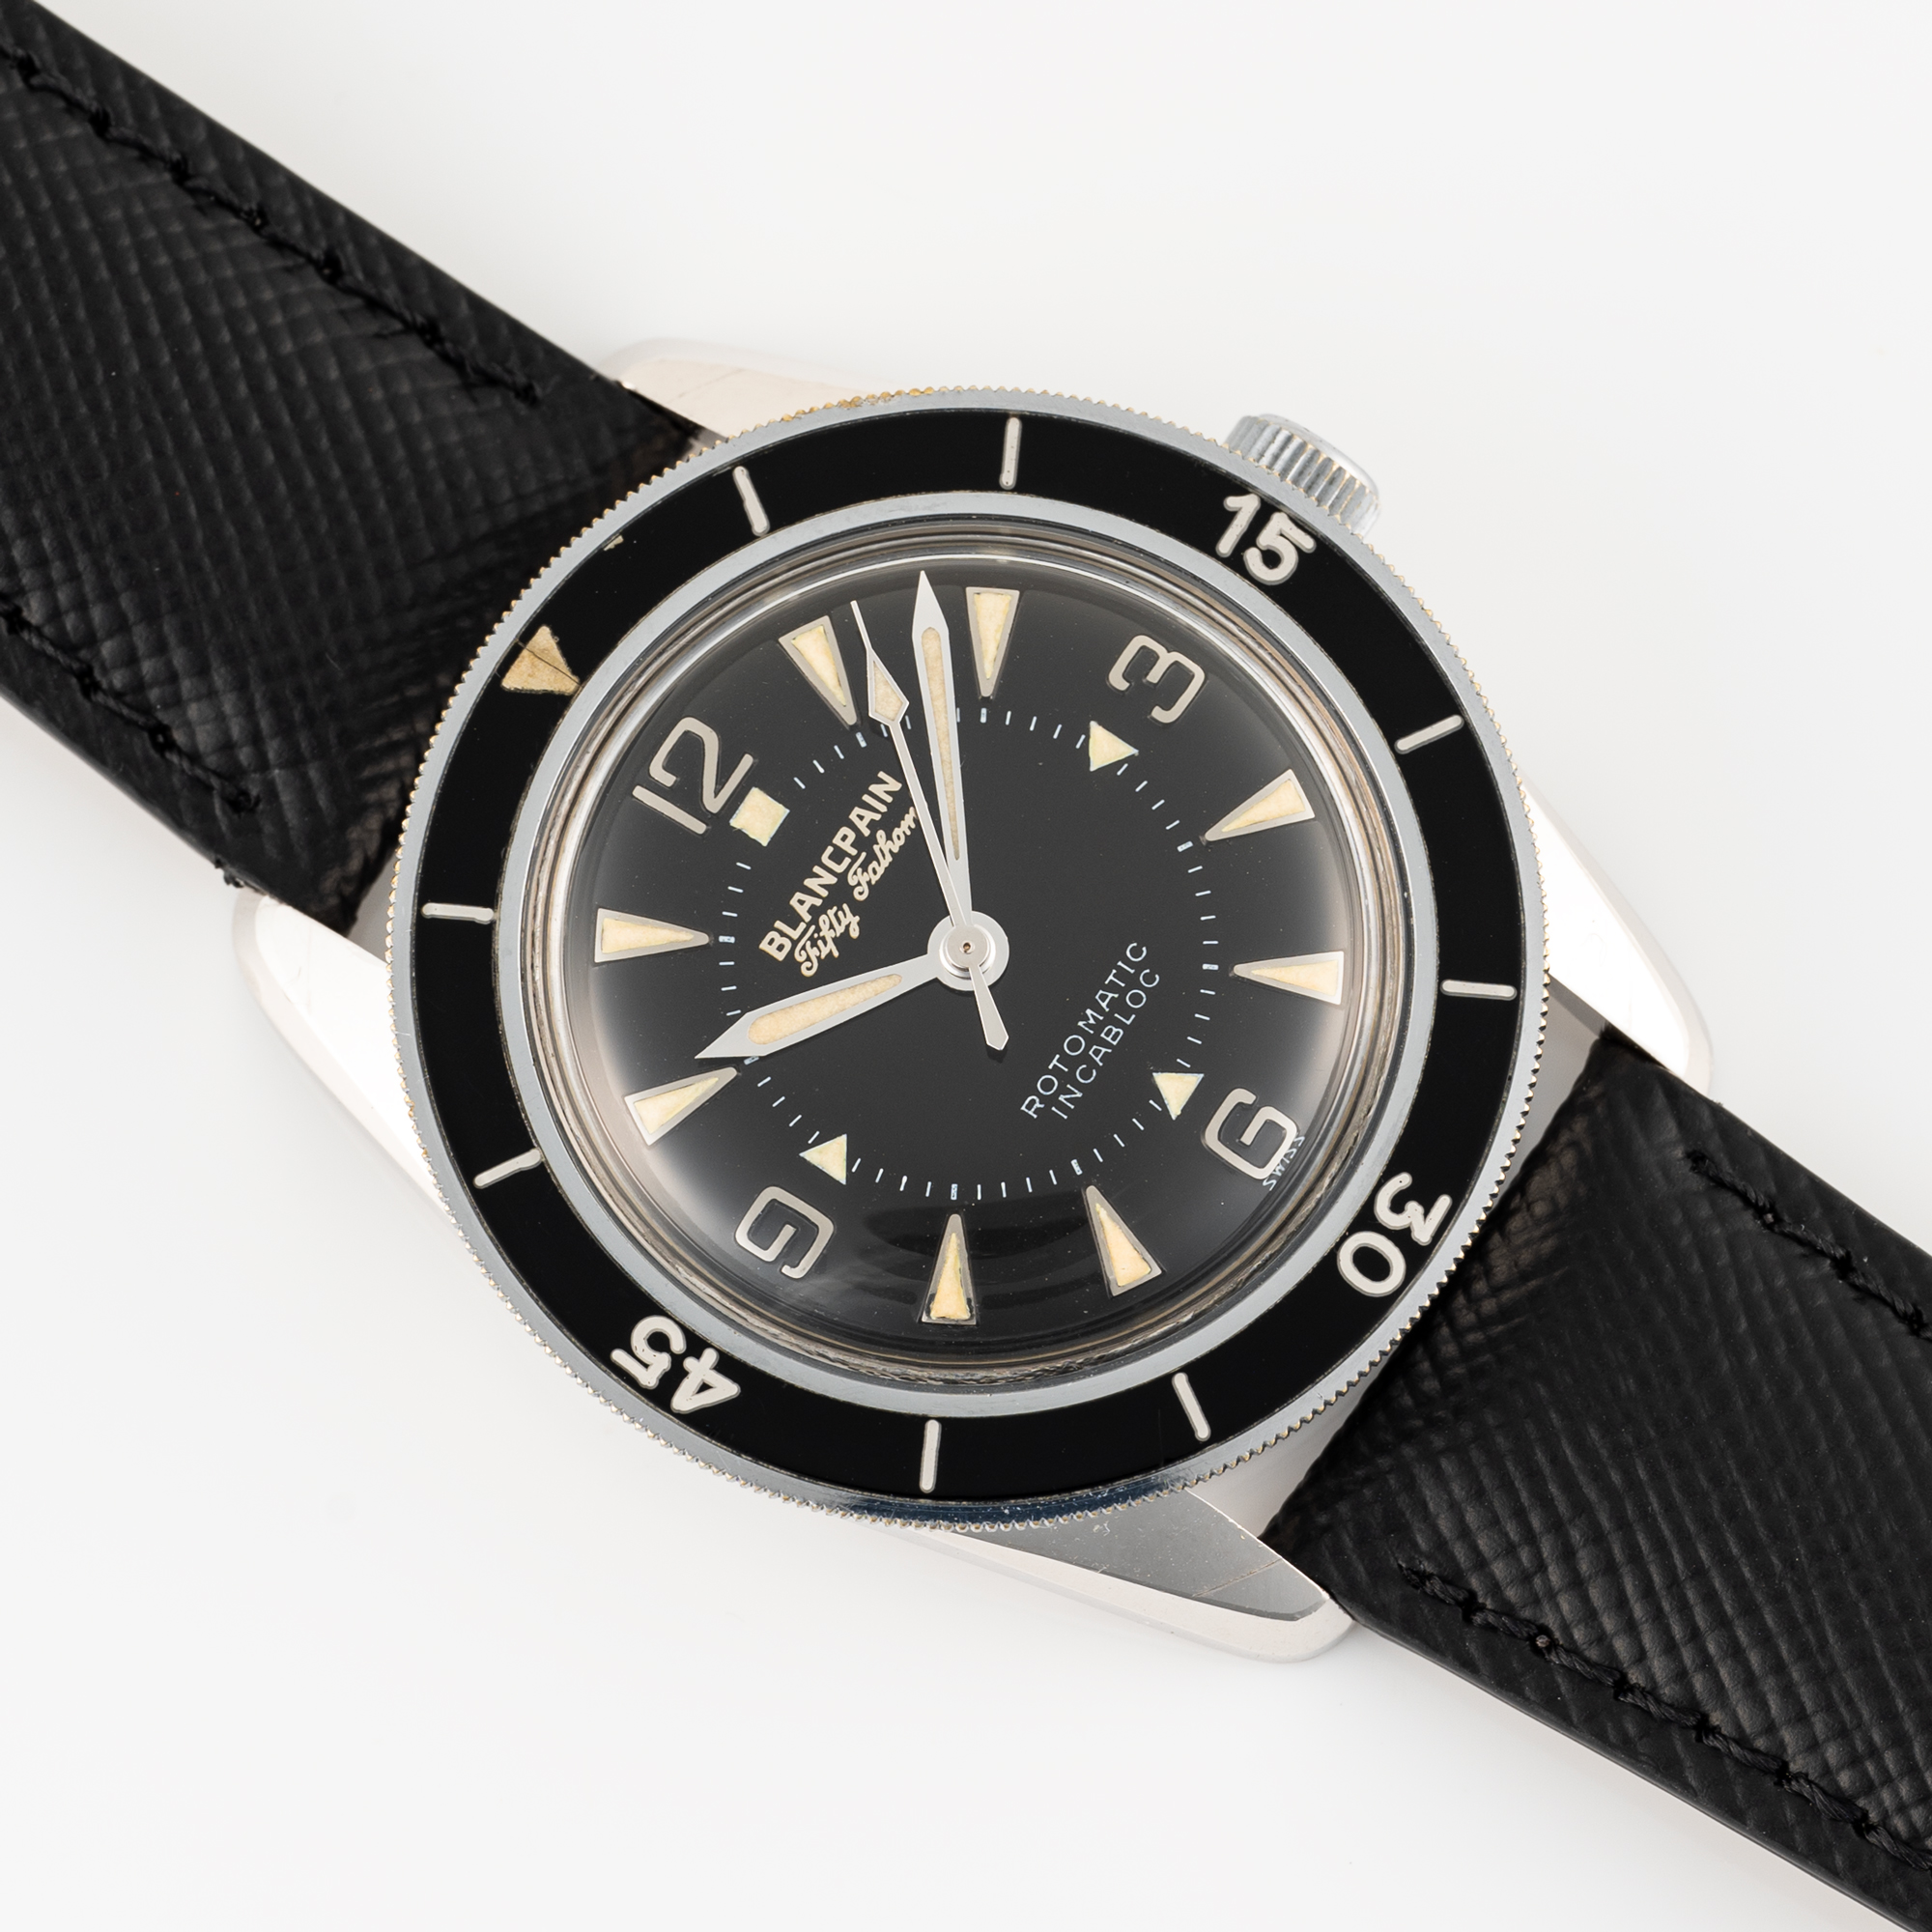 A RARE GENTLEMAN'S SIZE BLANCPAIN FIFTY FATHOMS ROTOMATIC DIVERS WRIST WATCH CIRCA 1950s, THIS WATCH - Image 5 of 8